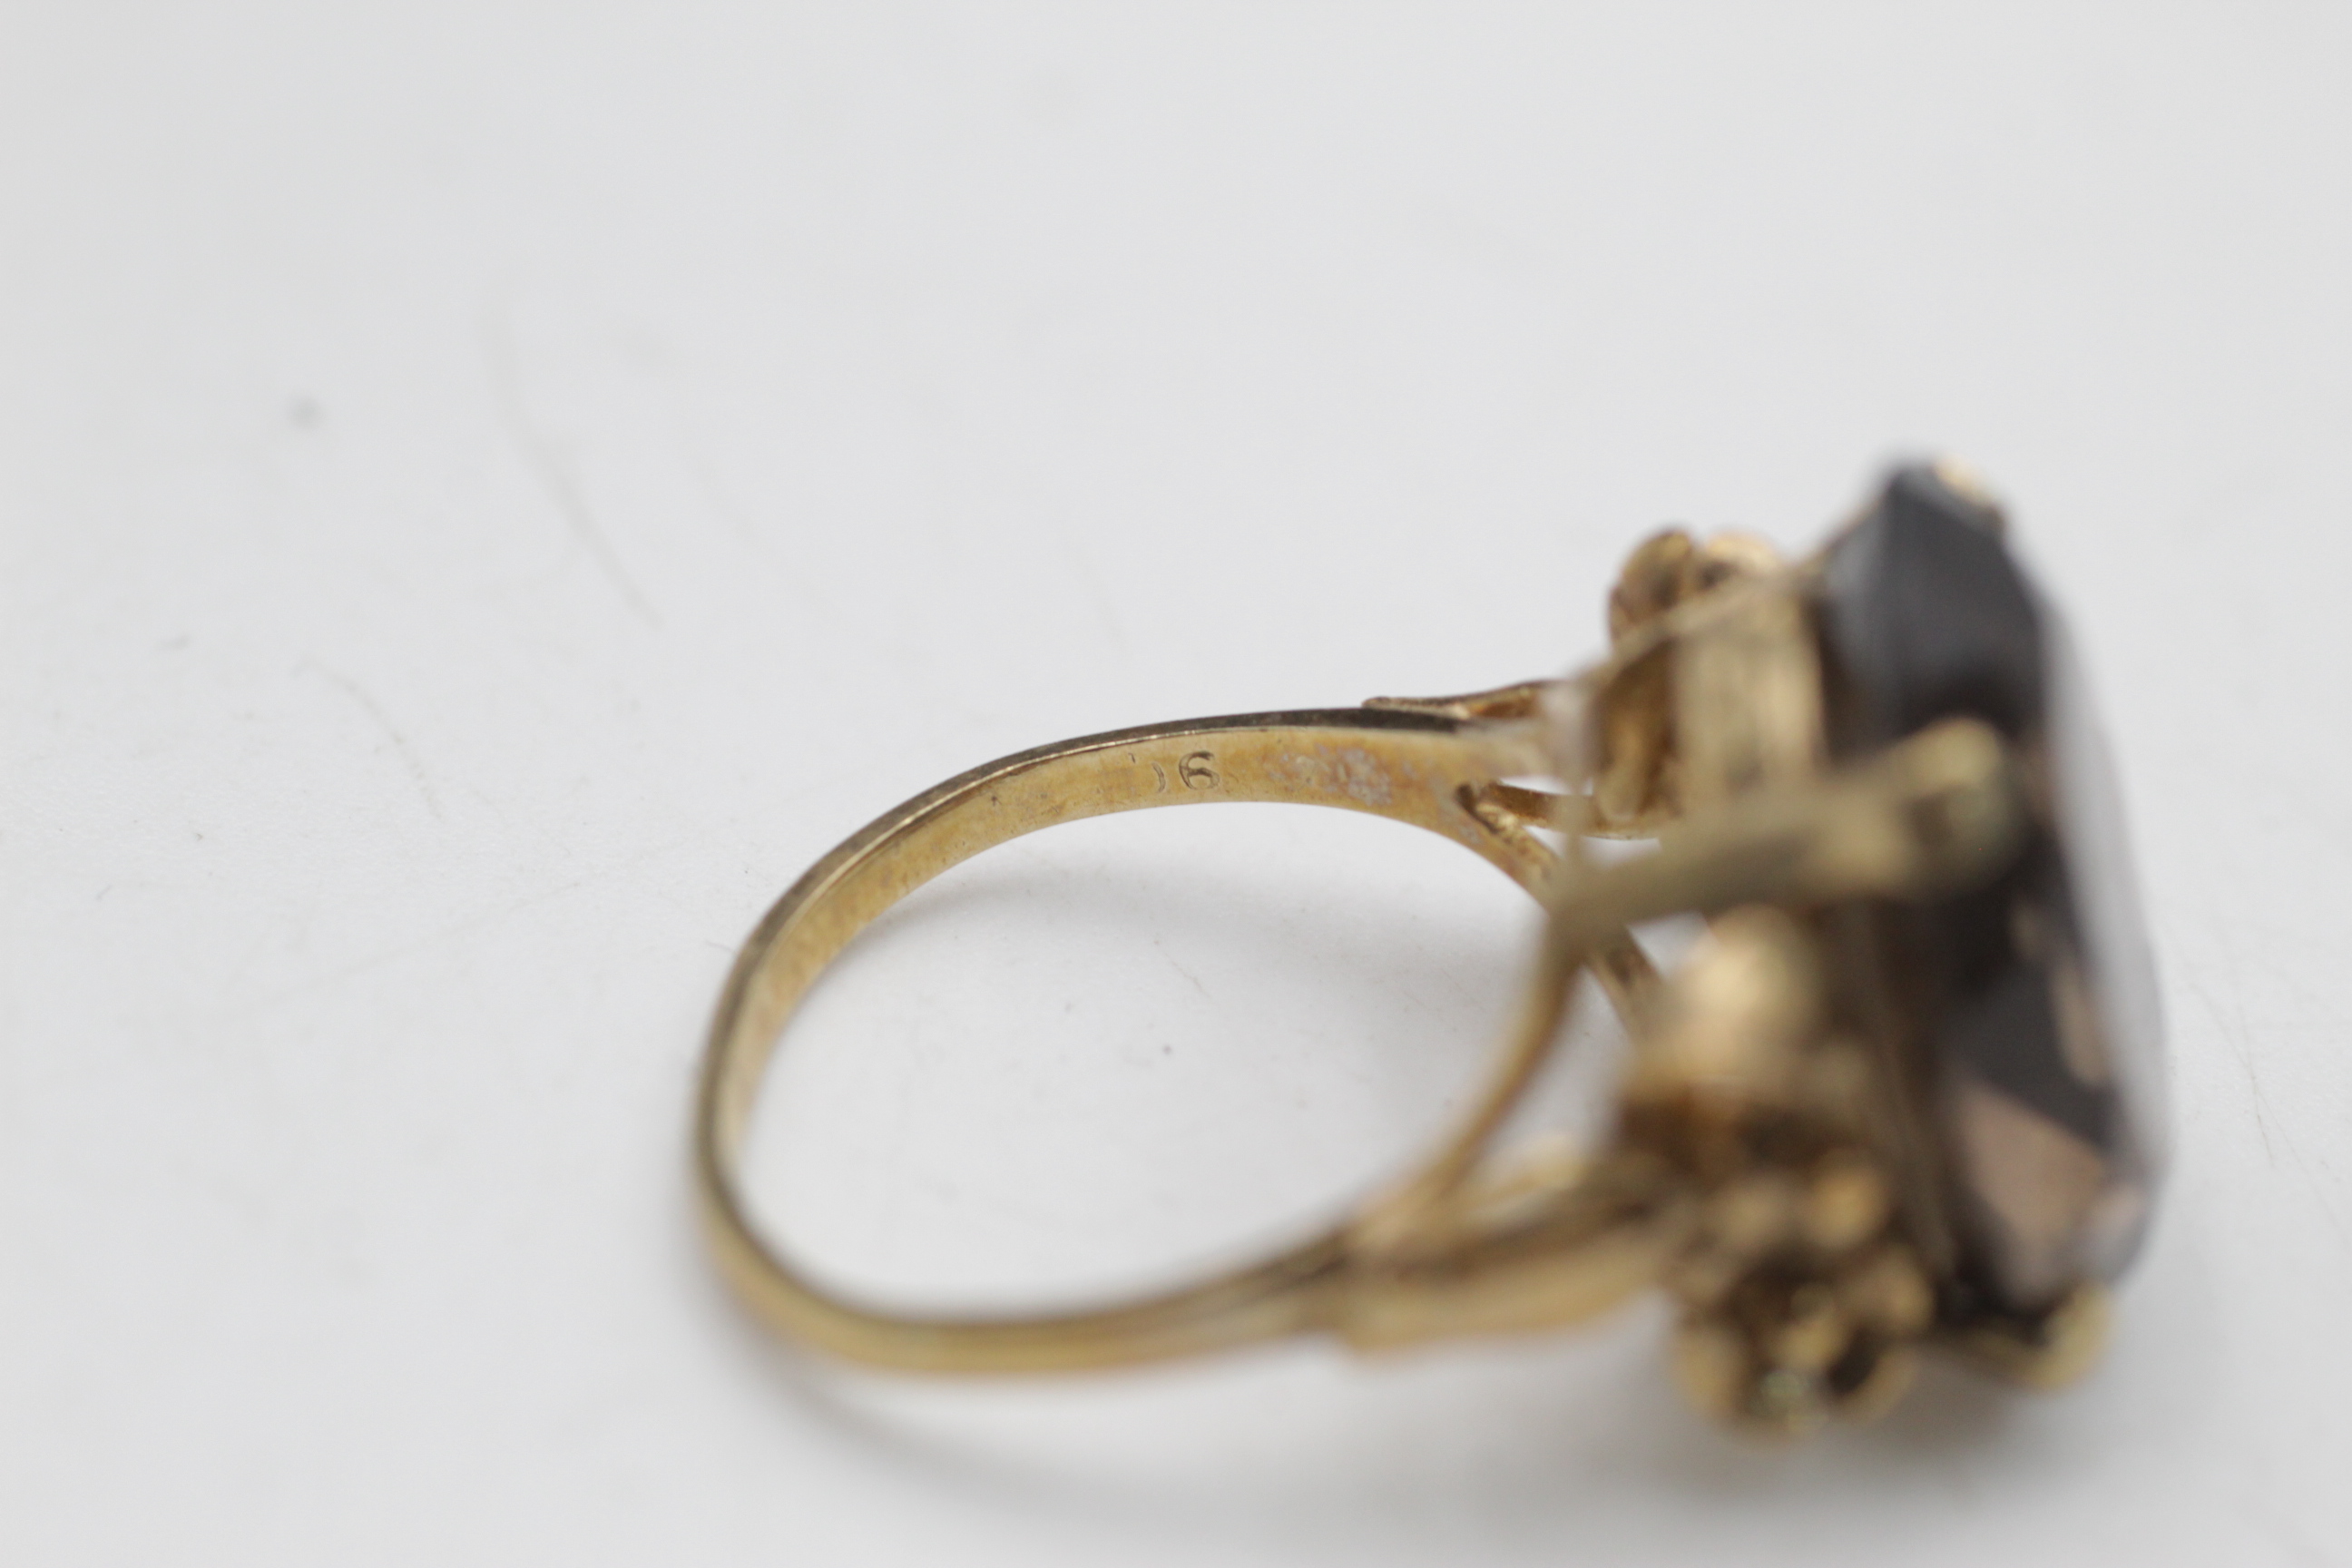 9ct gold vintage smoky quartz solitaire ornate floral setting cocktail ring (5.5g) - Image 5 of 5